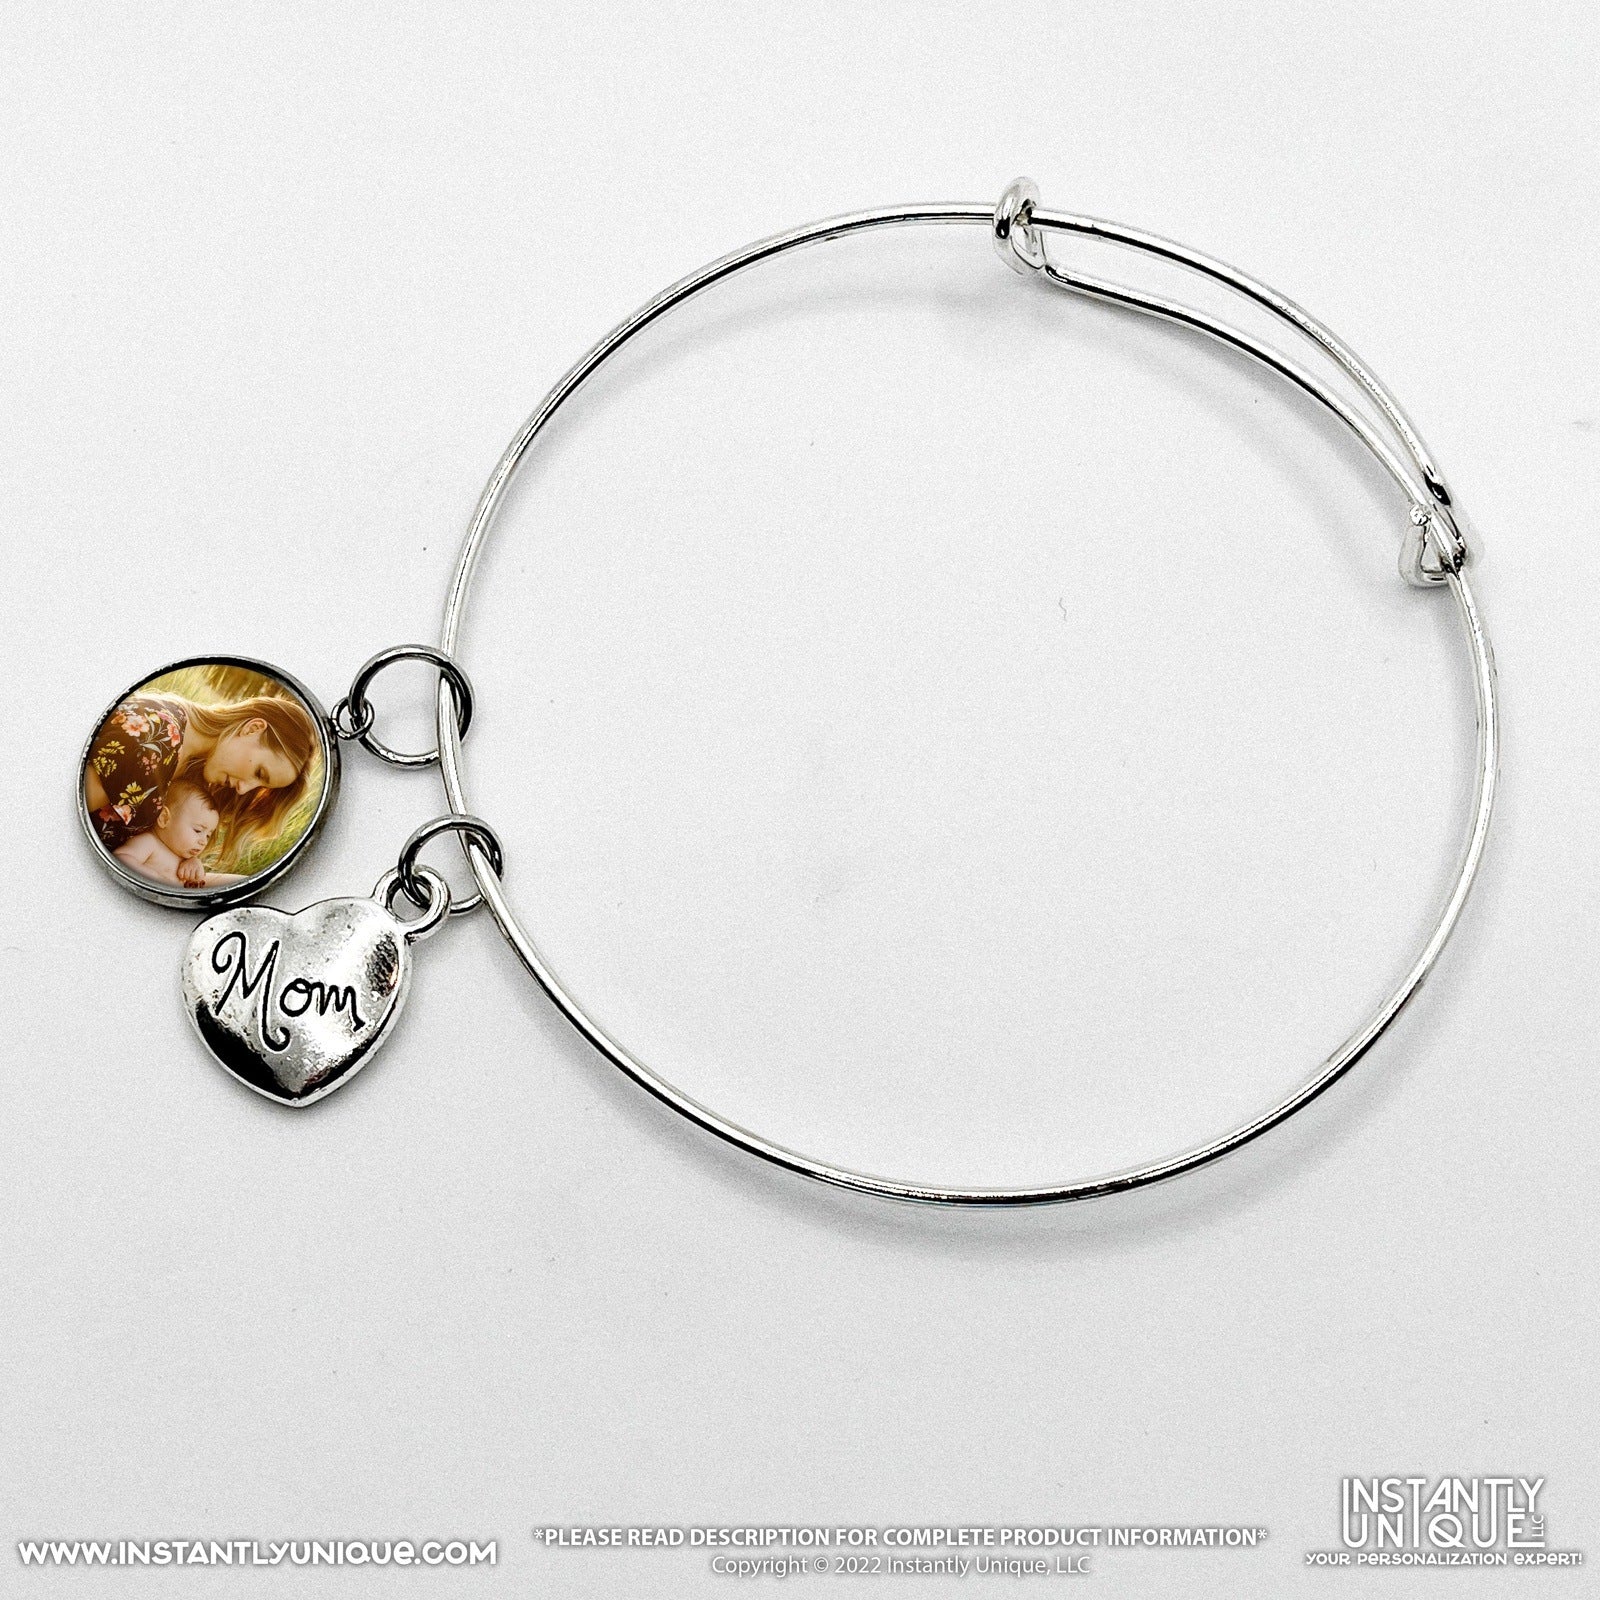 Mom Heart Charm Adjustable Silver Bracelet with Your Photo Charm